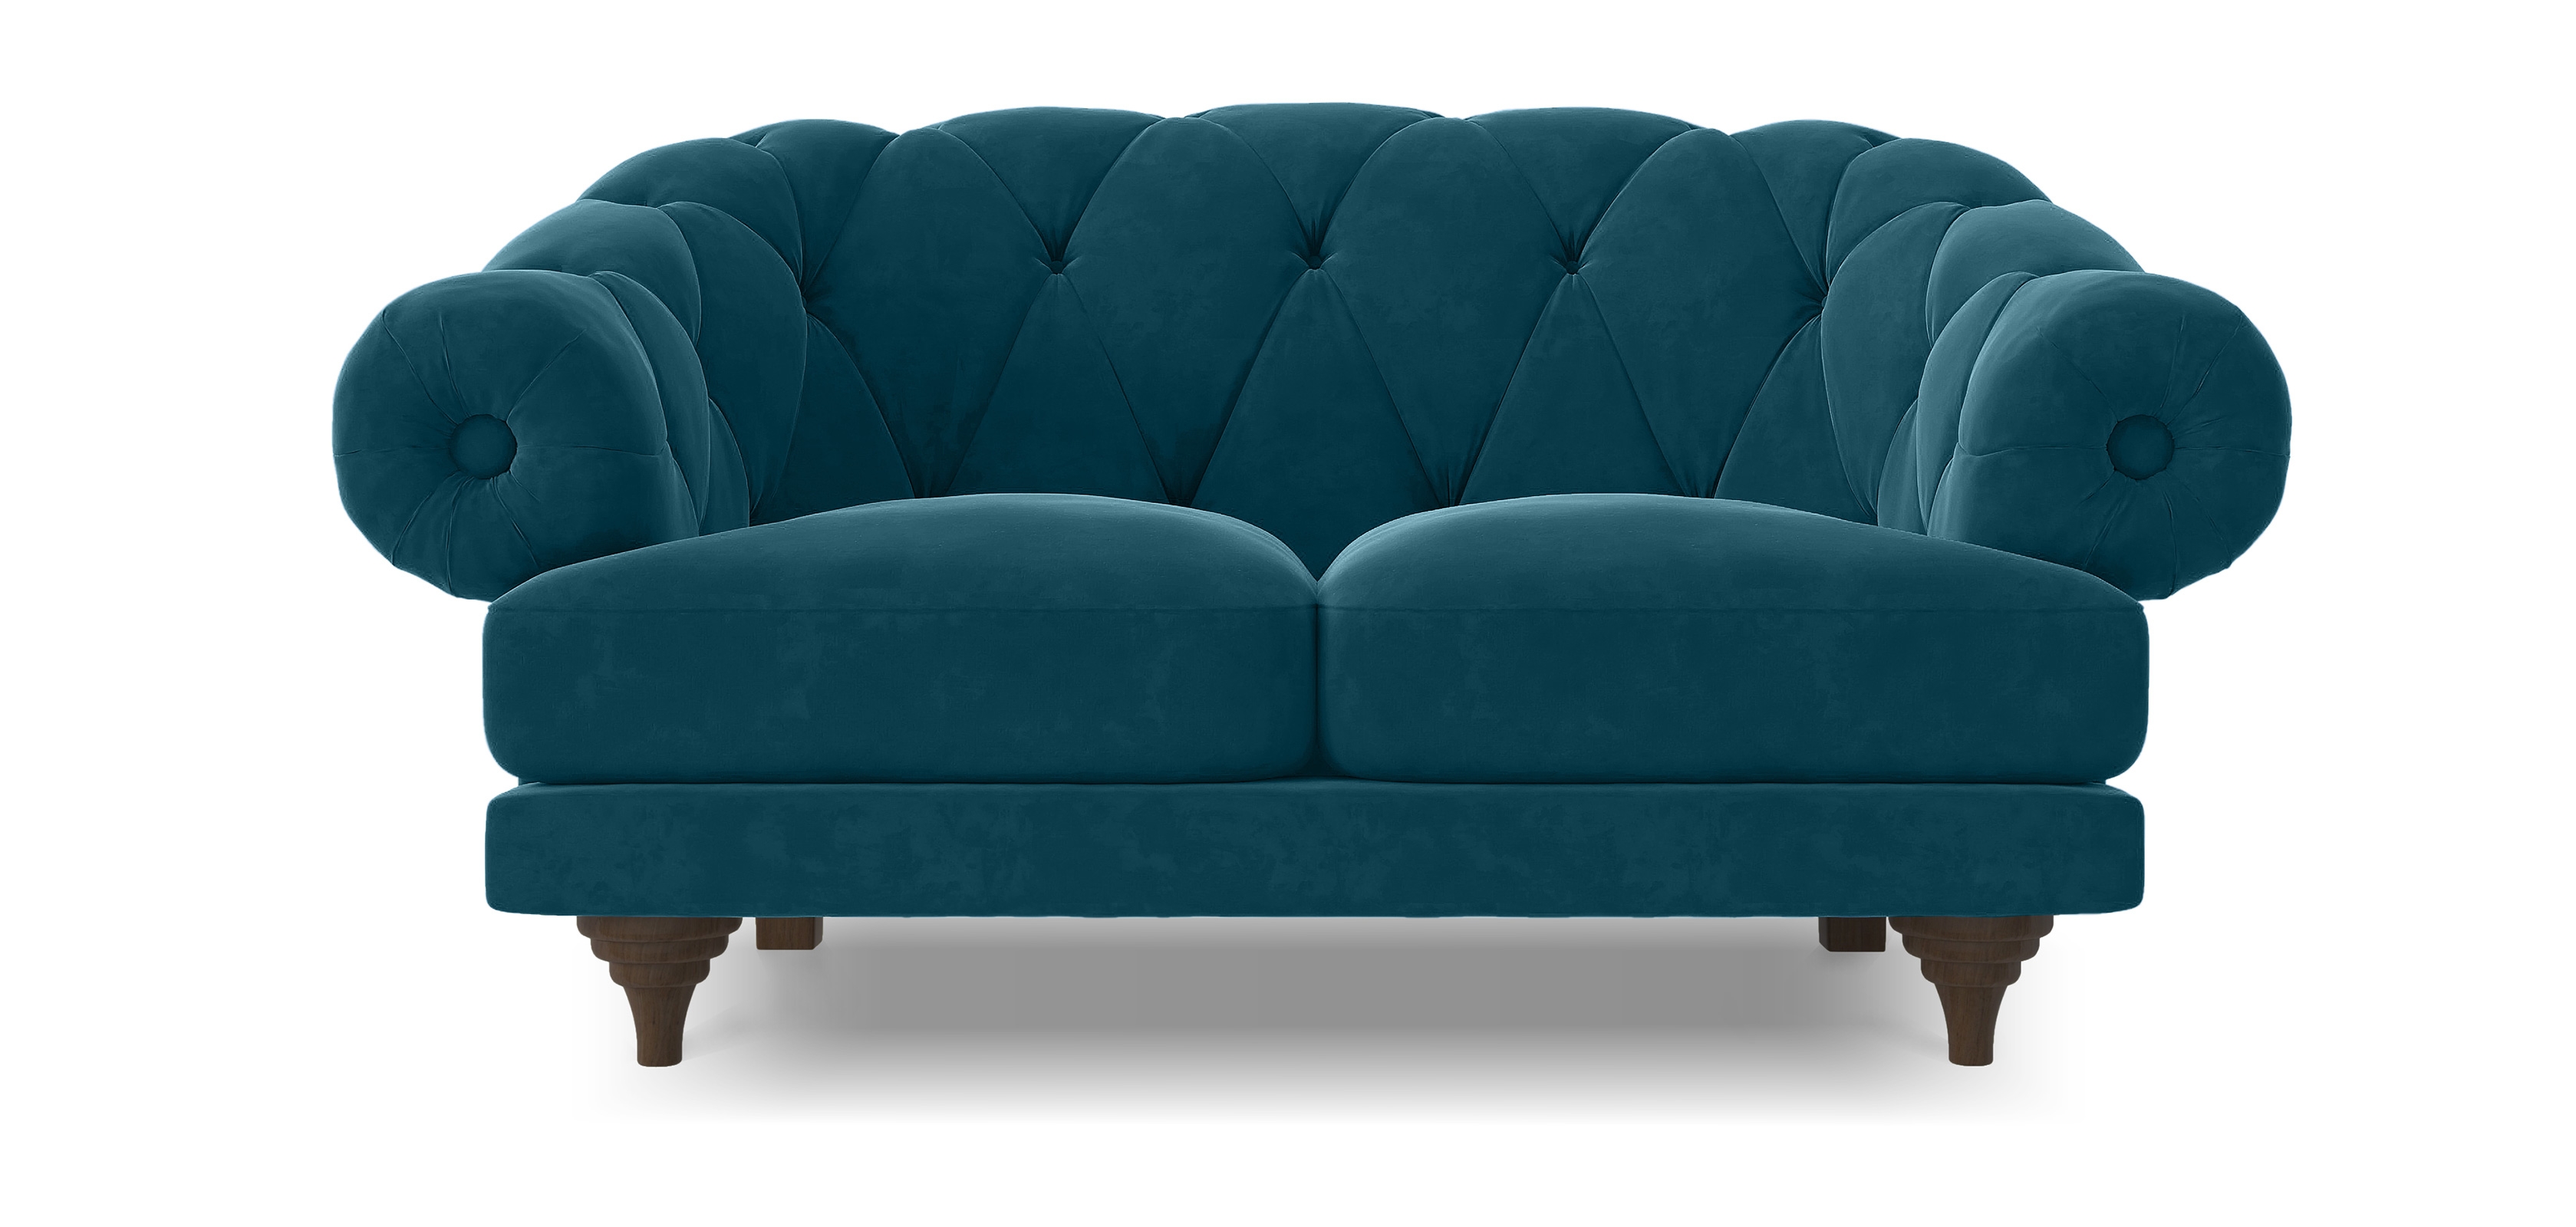 2 seater blue leather chesterfield sofa